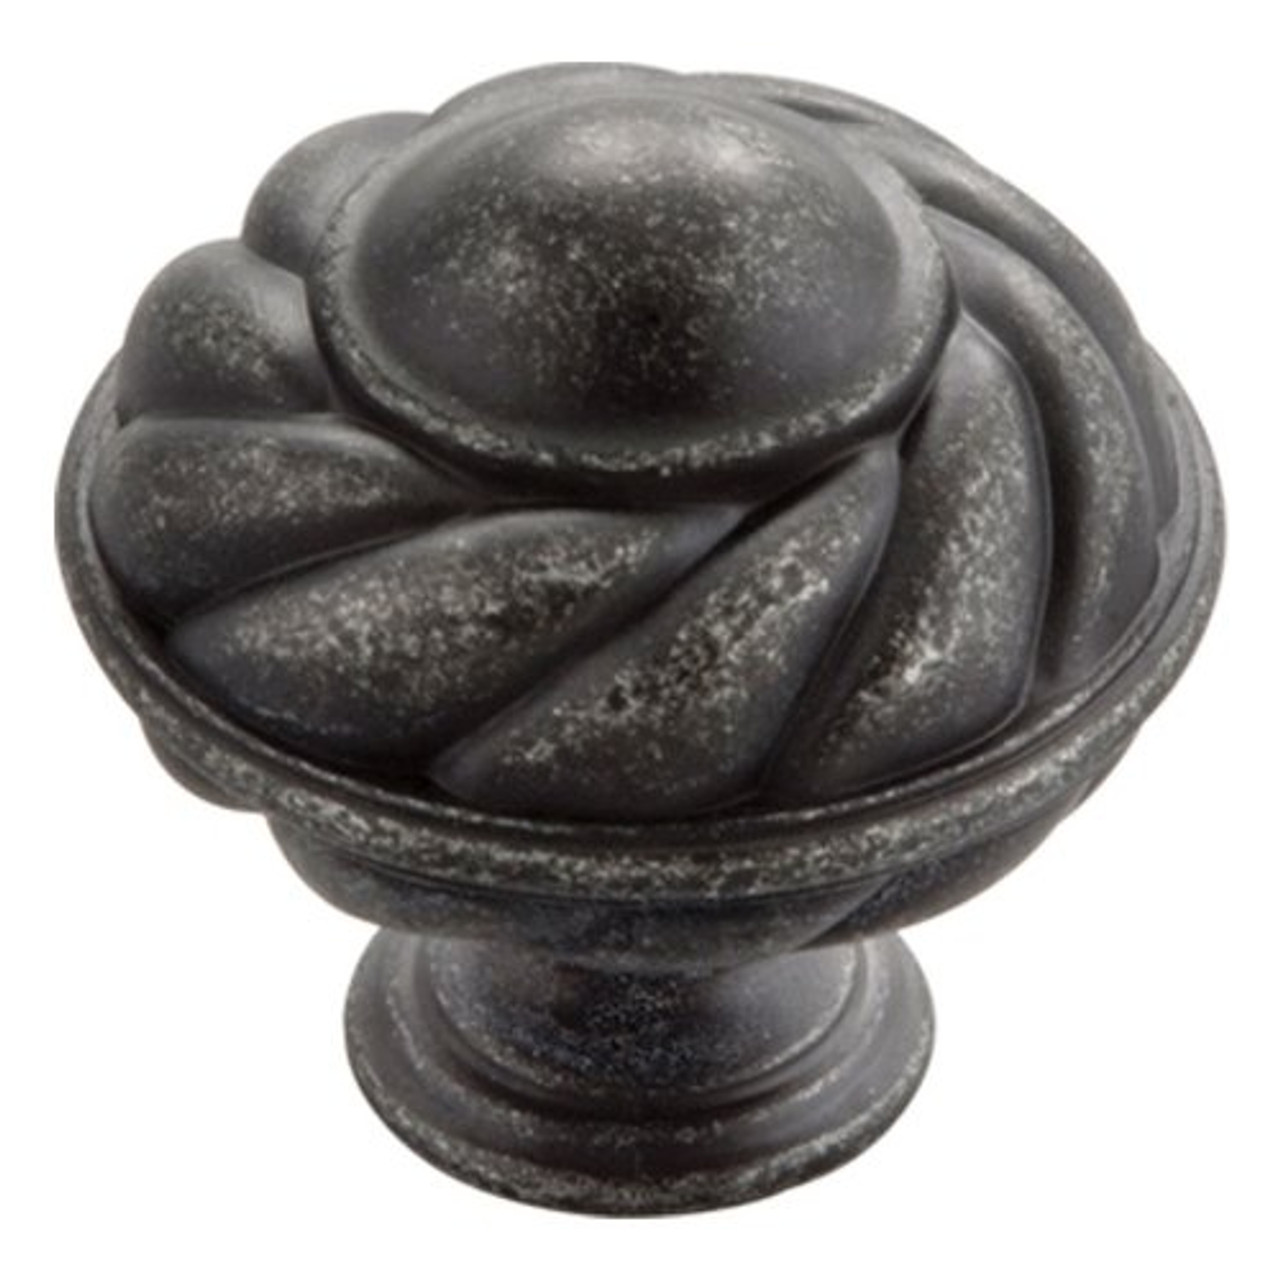 Hickory Hardware 1-5/16 INCH (33MM) FRENCH COUNTRY CABINET KNOB